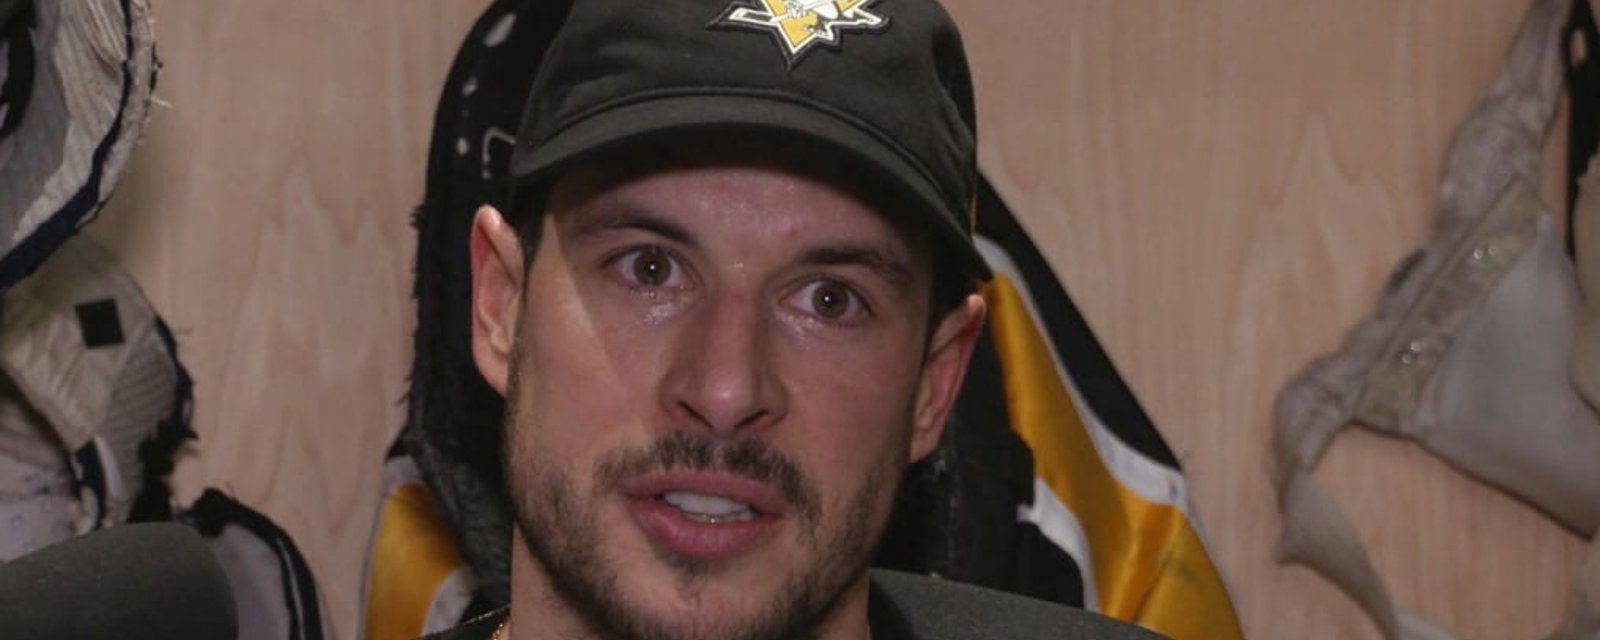 Anticipation that Sidney Crosby won’t re-sign on July 1st explained